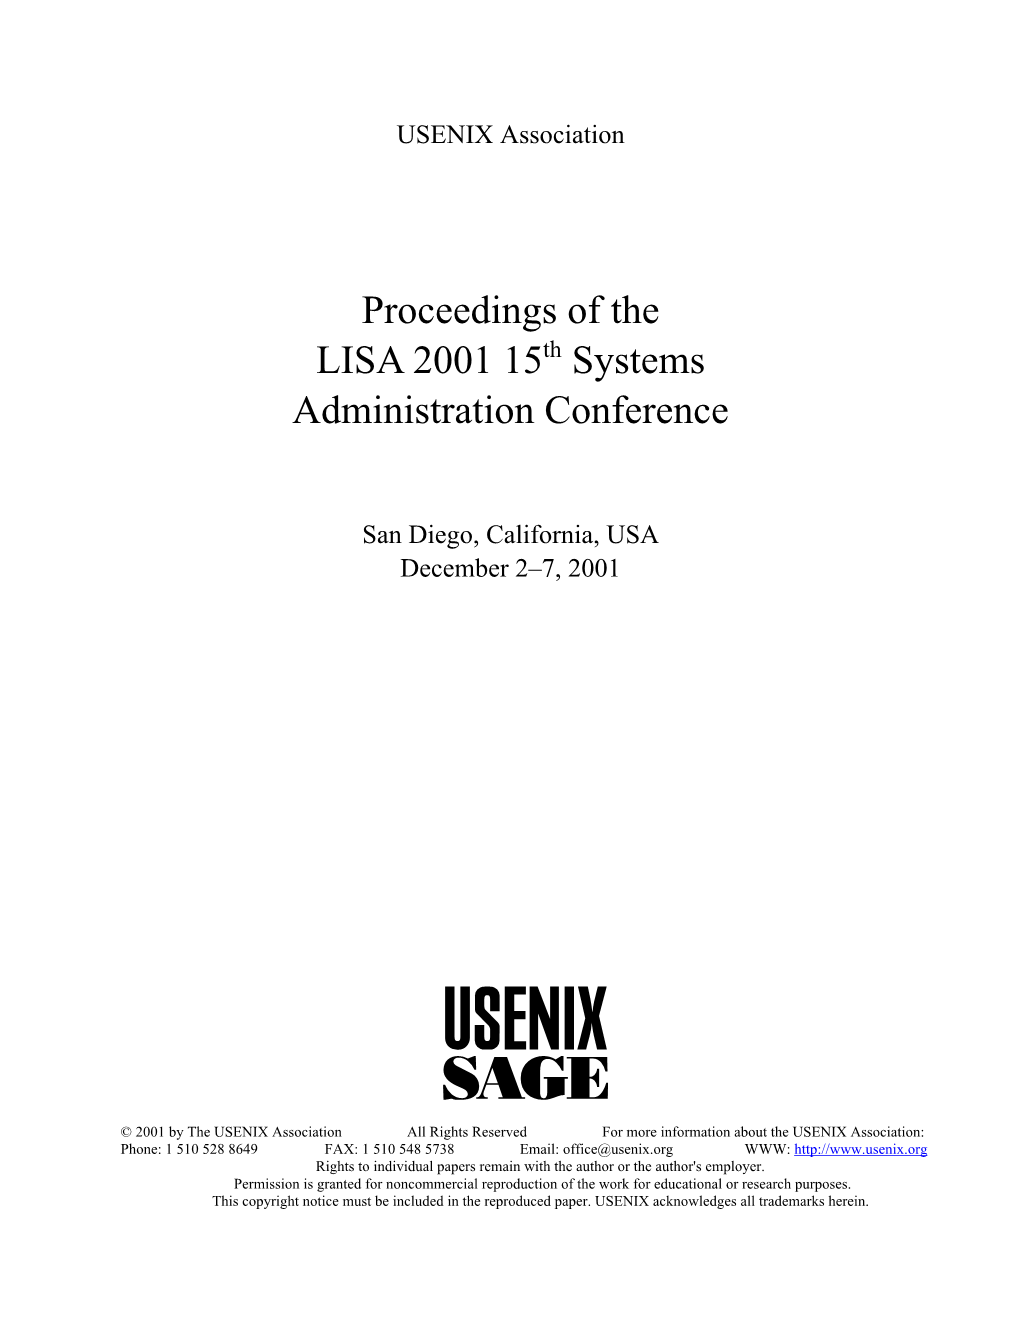 Proceedings of the LISA 2001 15 Systems Administration Conference